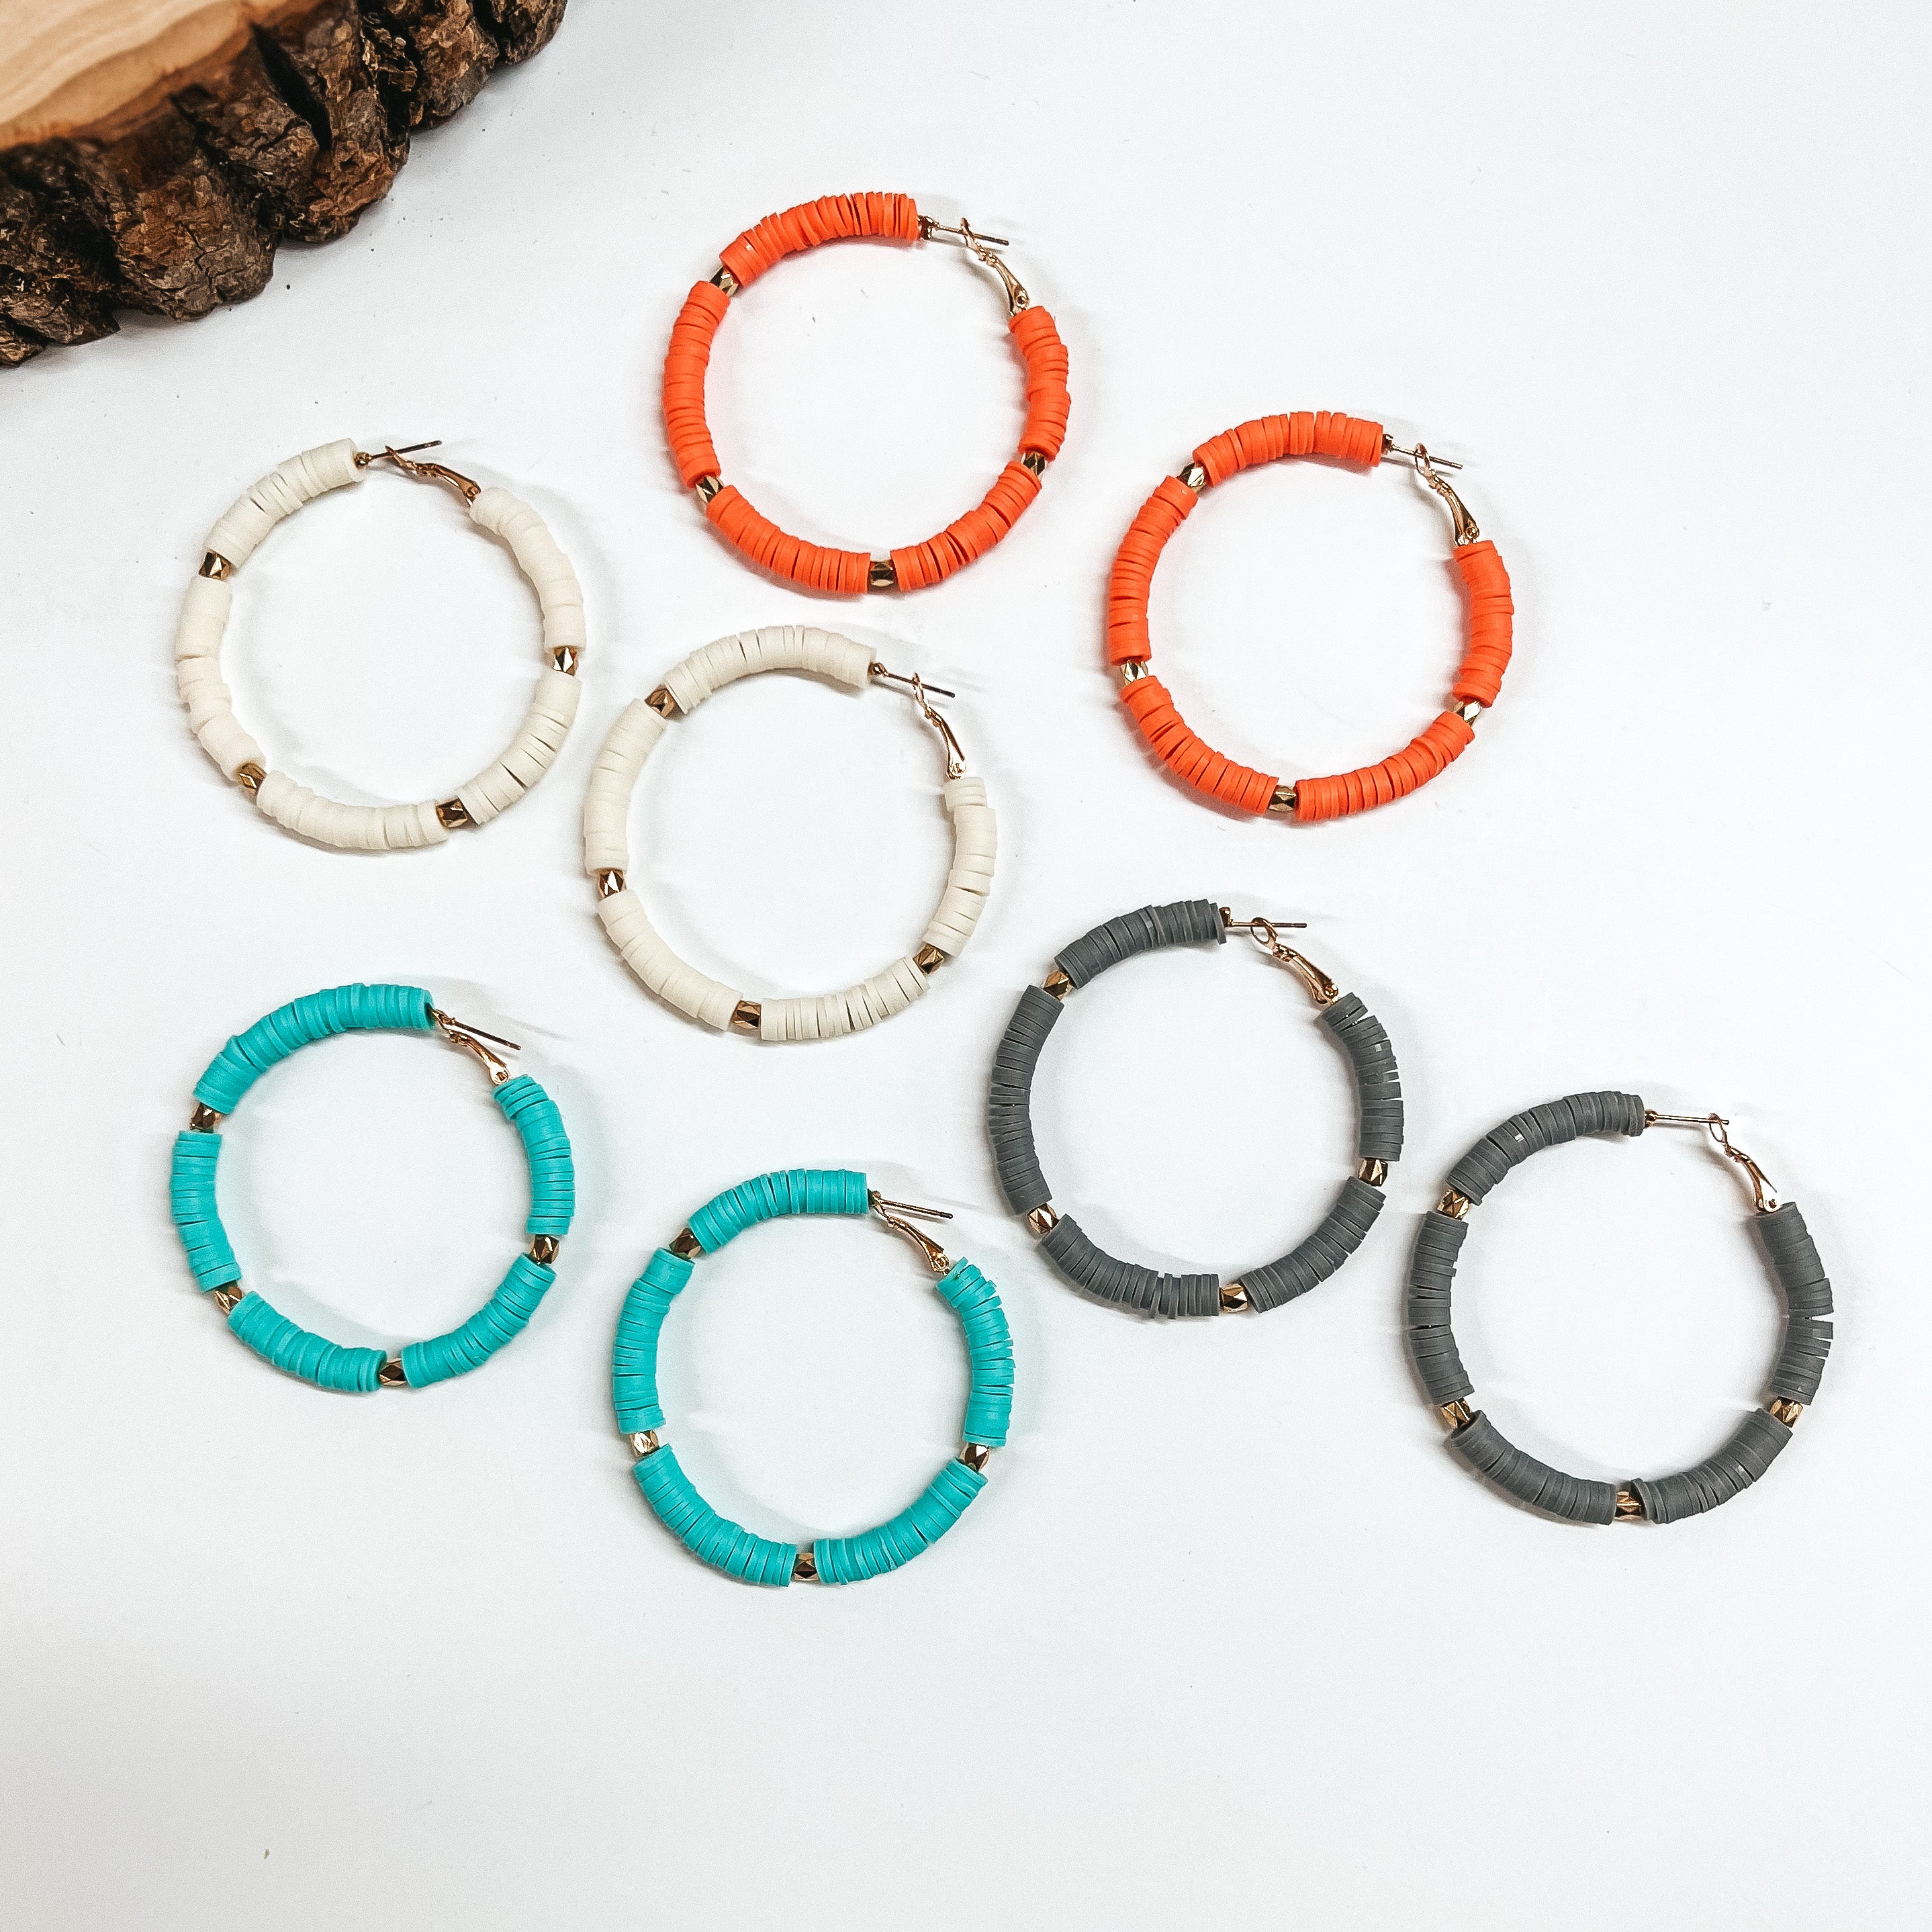 There are five pairs of beaded hoop earrings in different colors. From top to bottom; coral, ivory, gray, and turquoise. All hoops have disc beads and gold spacers. These earrings are taken on a white background with a slab of wood in the back as decor.